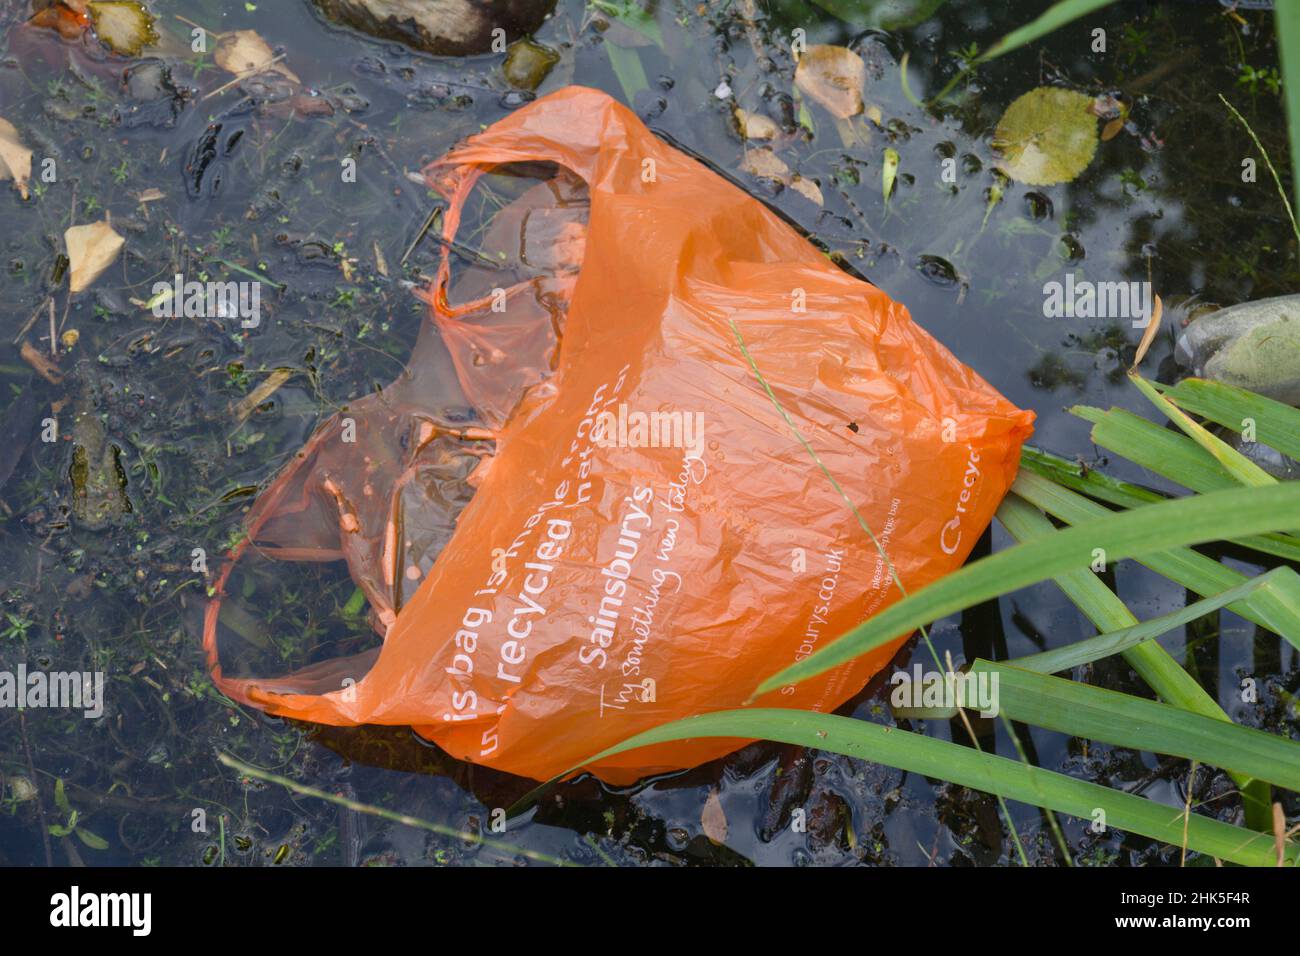 Now here's a grim joke - the bag is exhorting us to recycle it... presumably that doesn't mean chucking it in Oxford Canal! Stock Photo